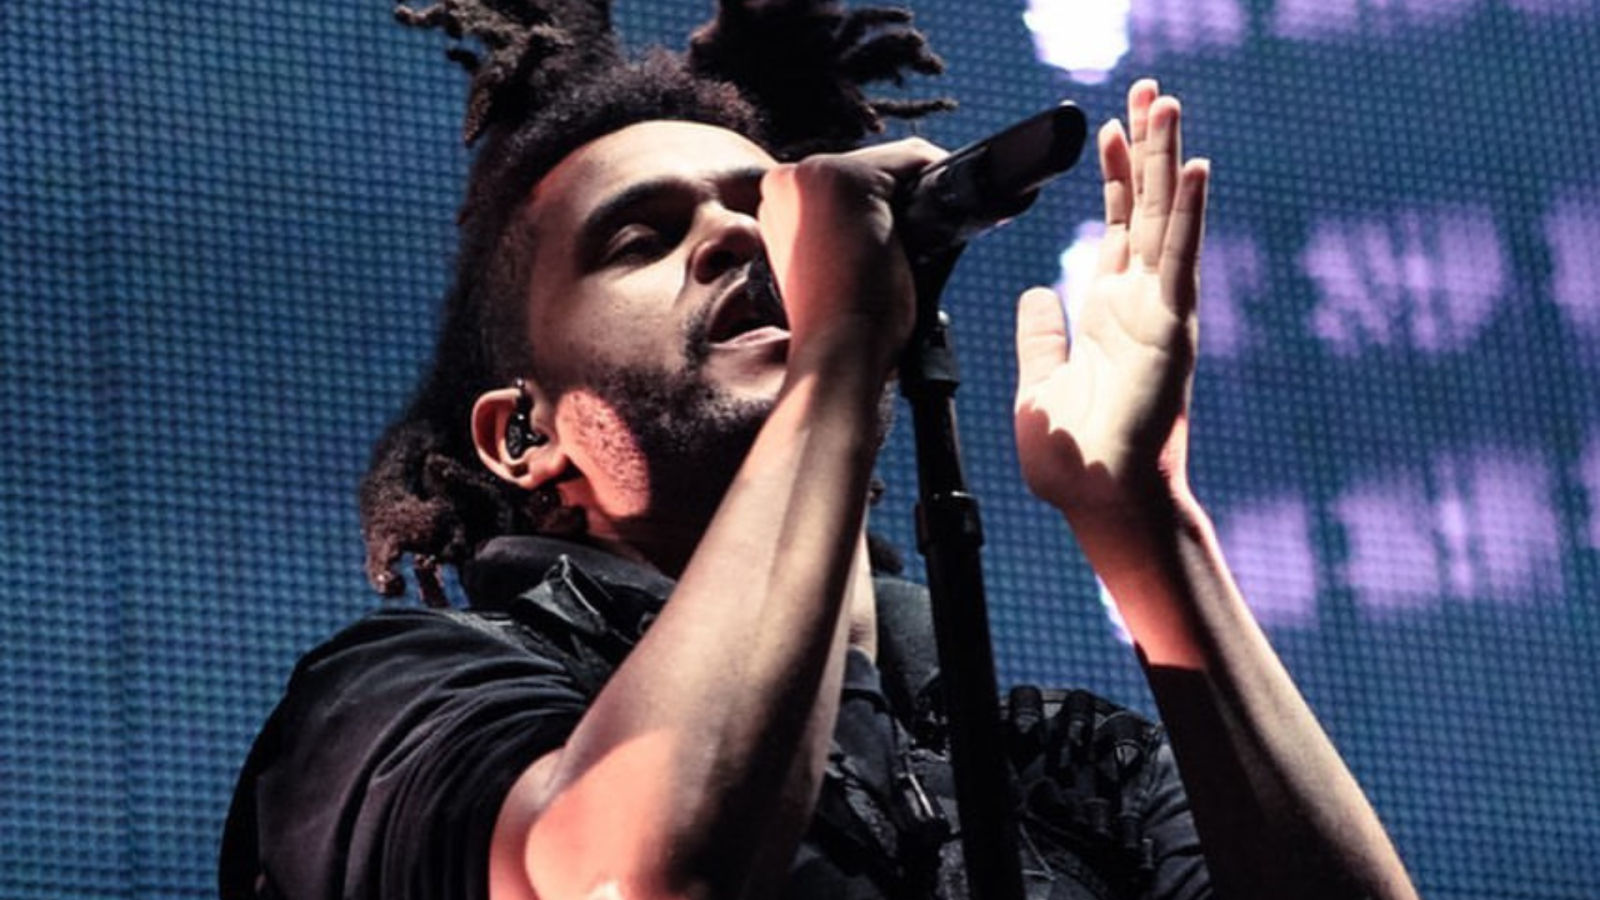 Abel Tesfaye hints upcoming album may be his last as The Weeknd